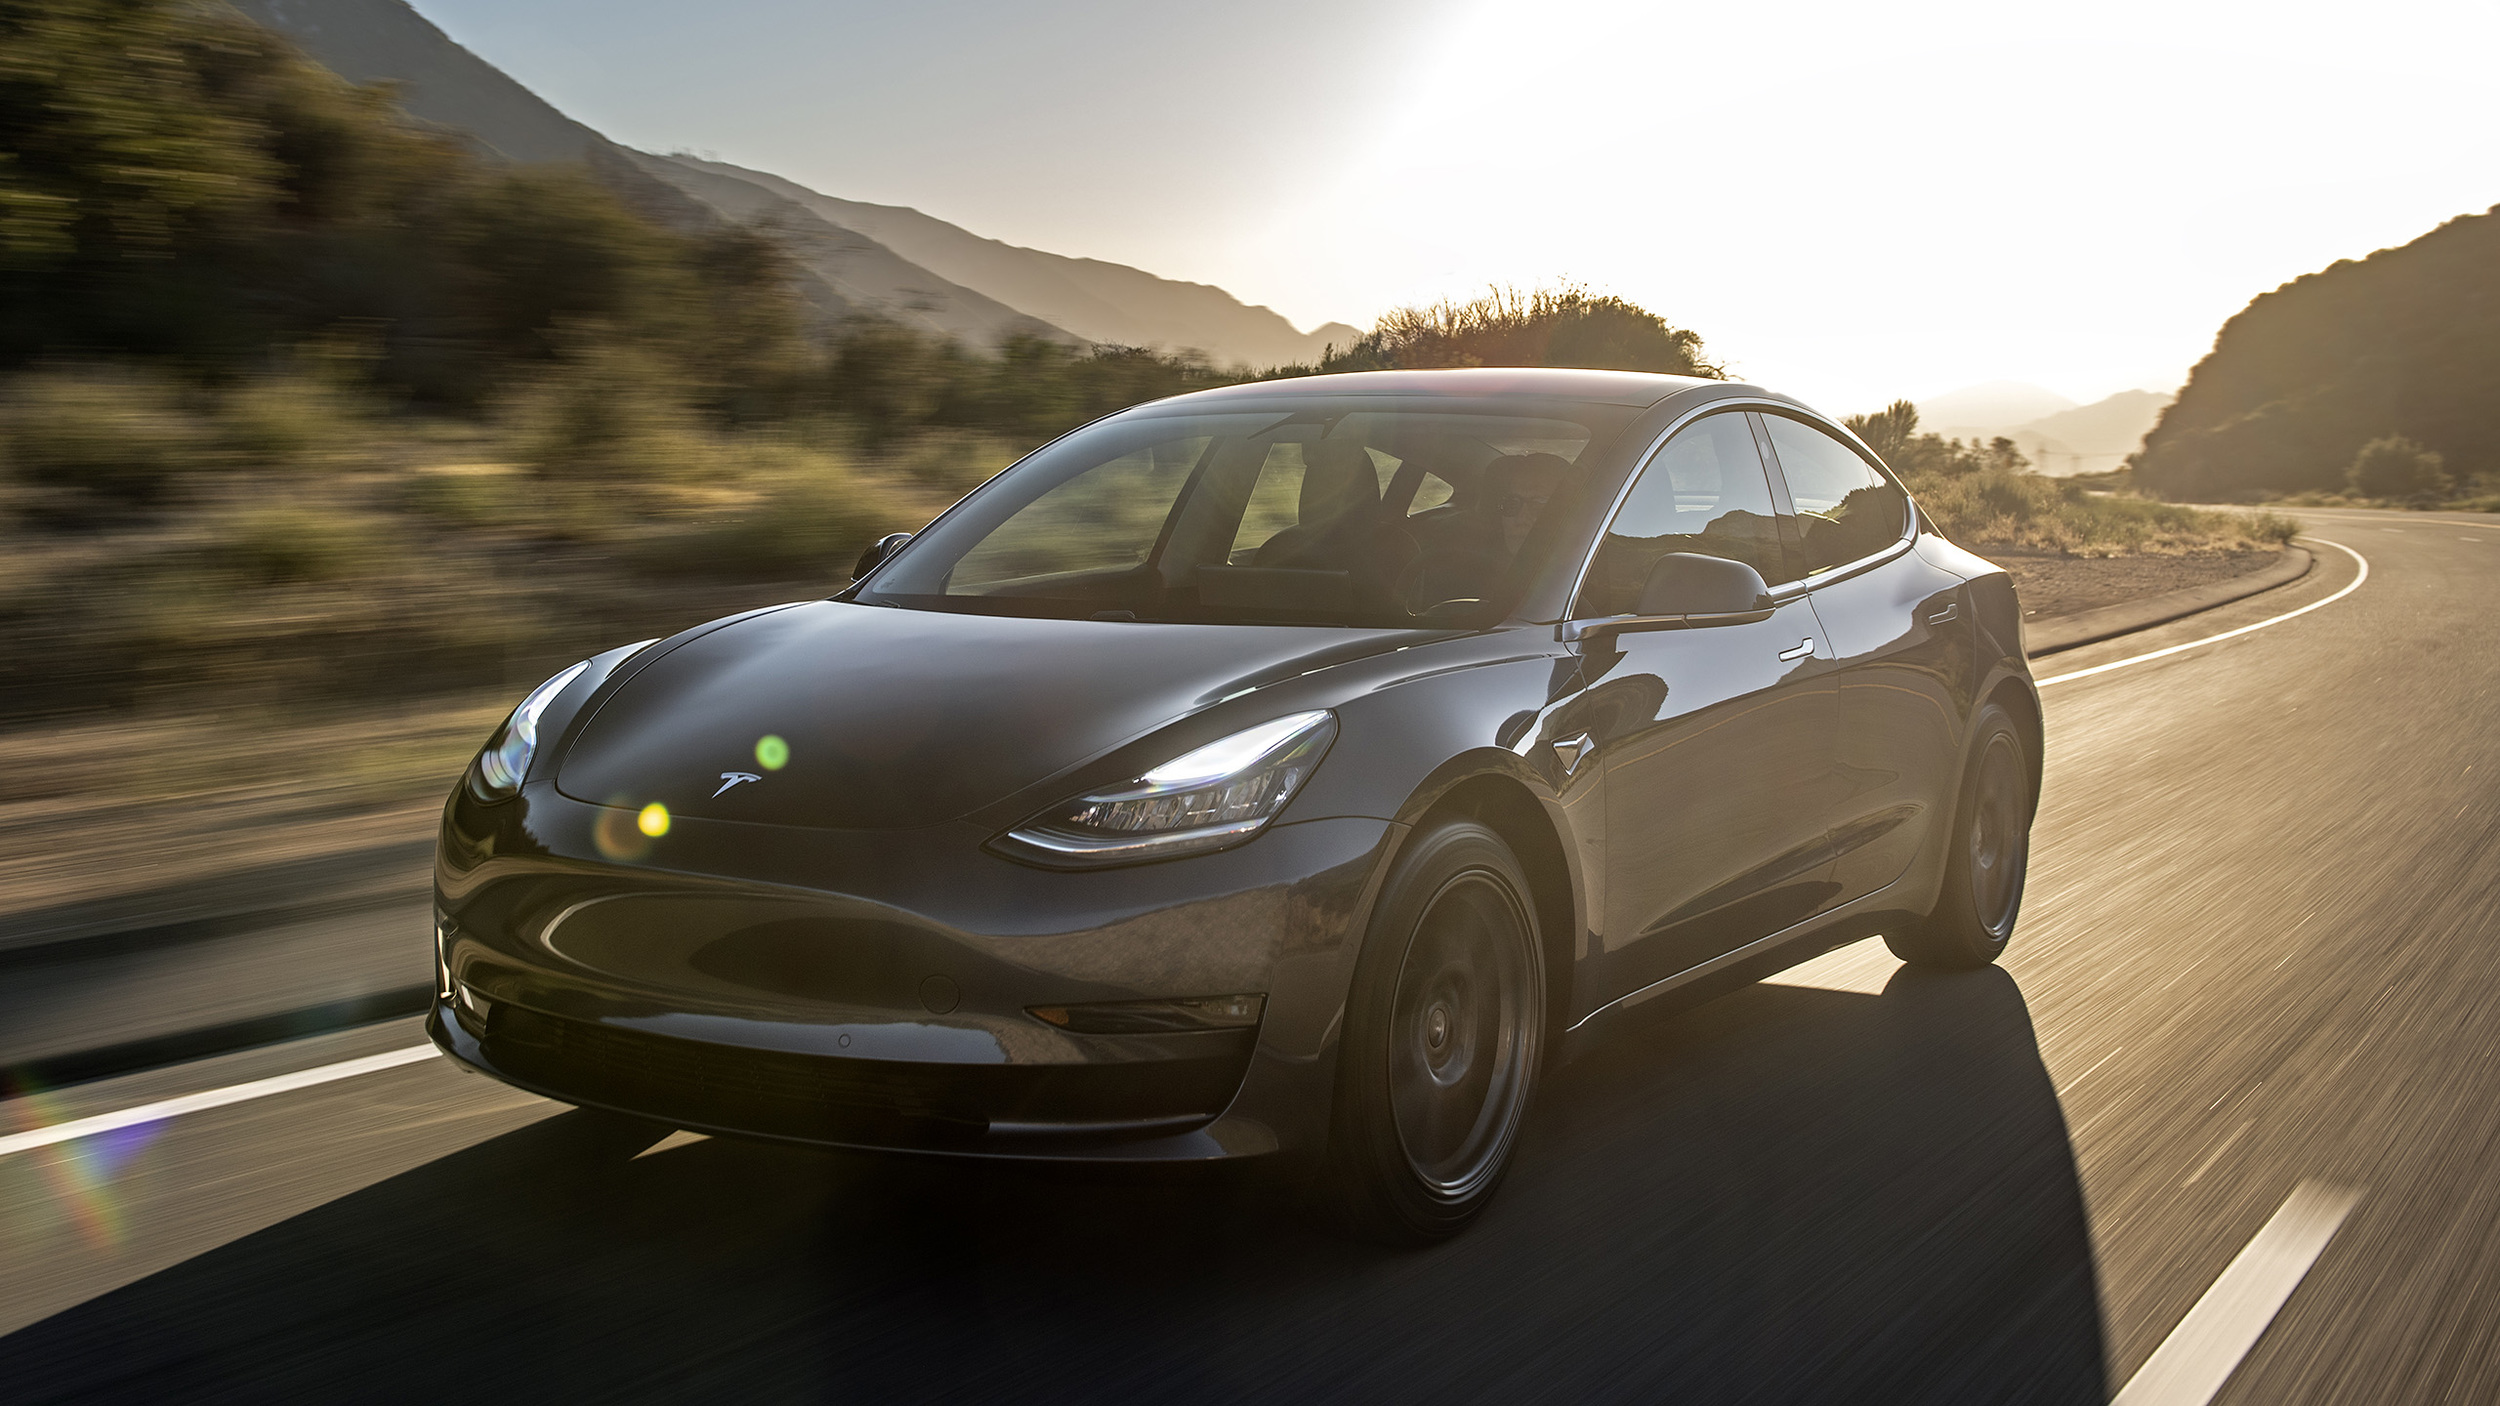 20+ Tesla Model 3 HD Wallpapers and Backgrounds